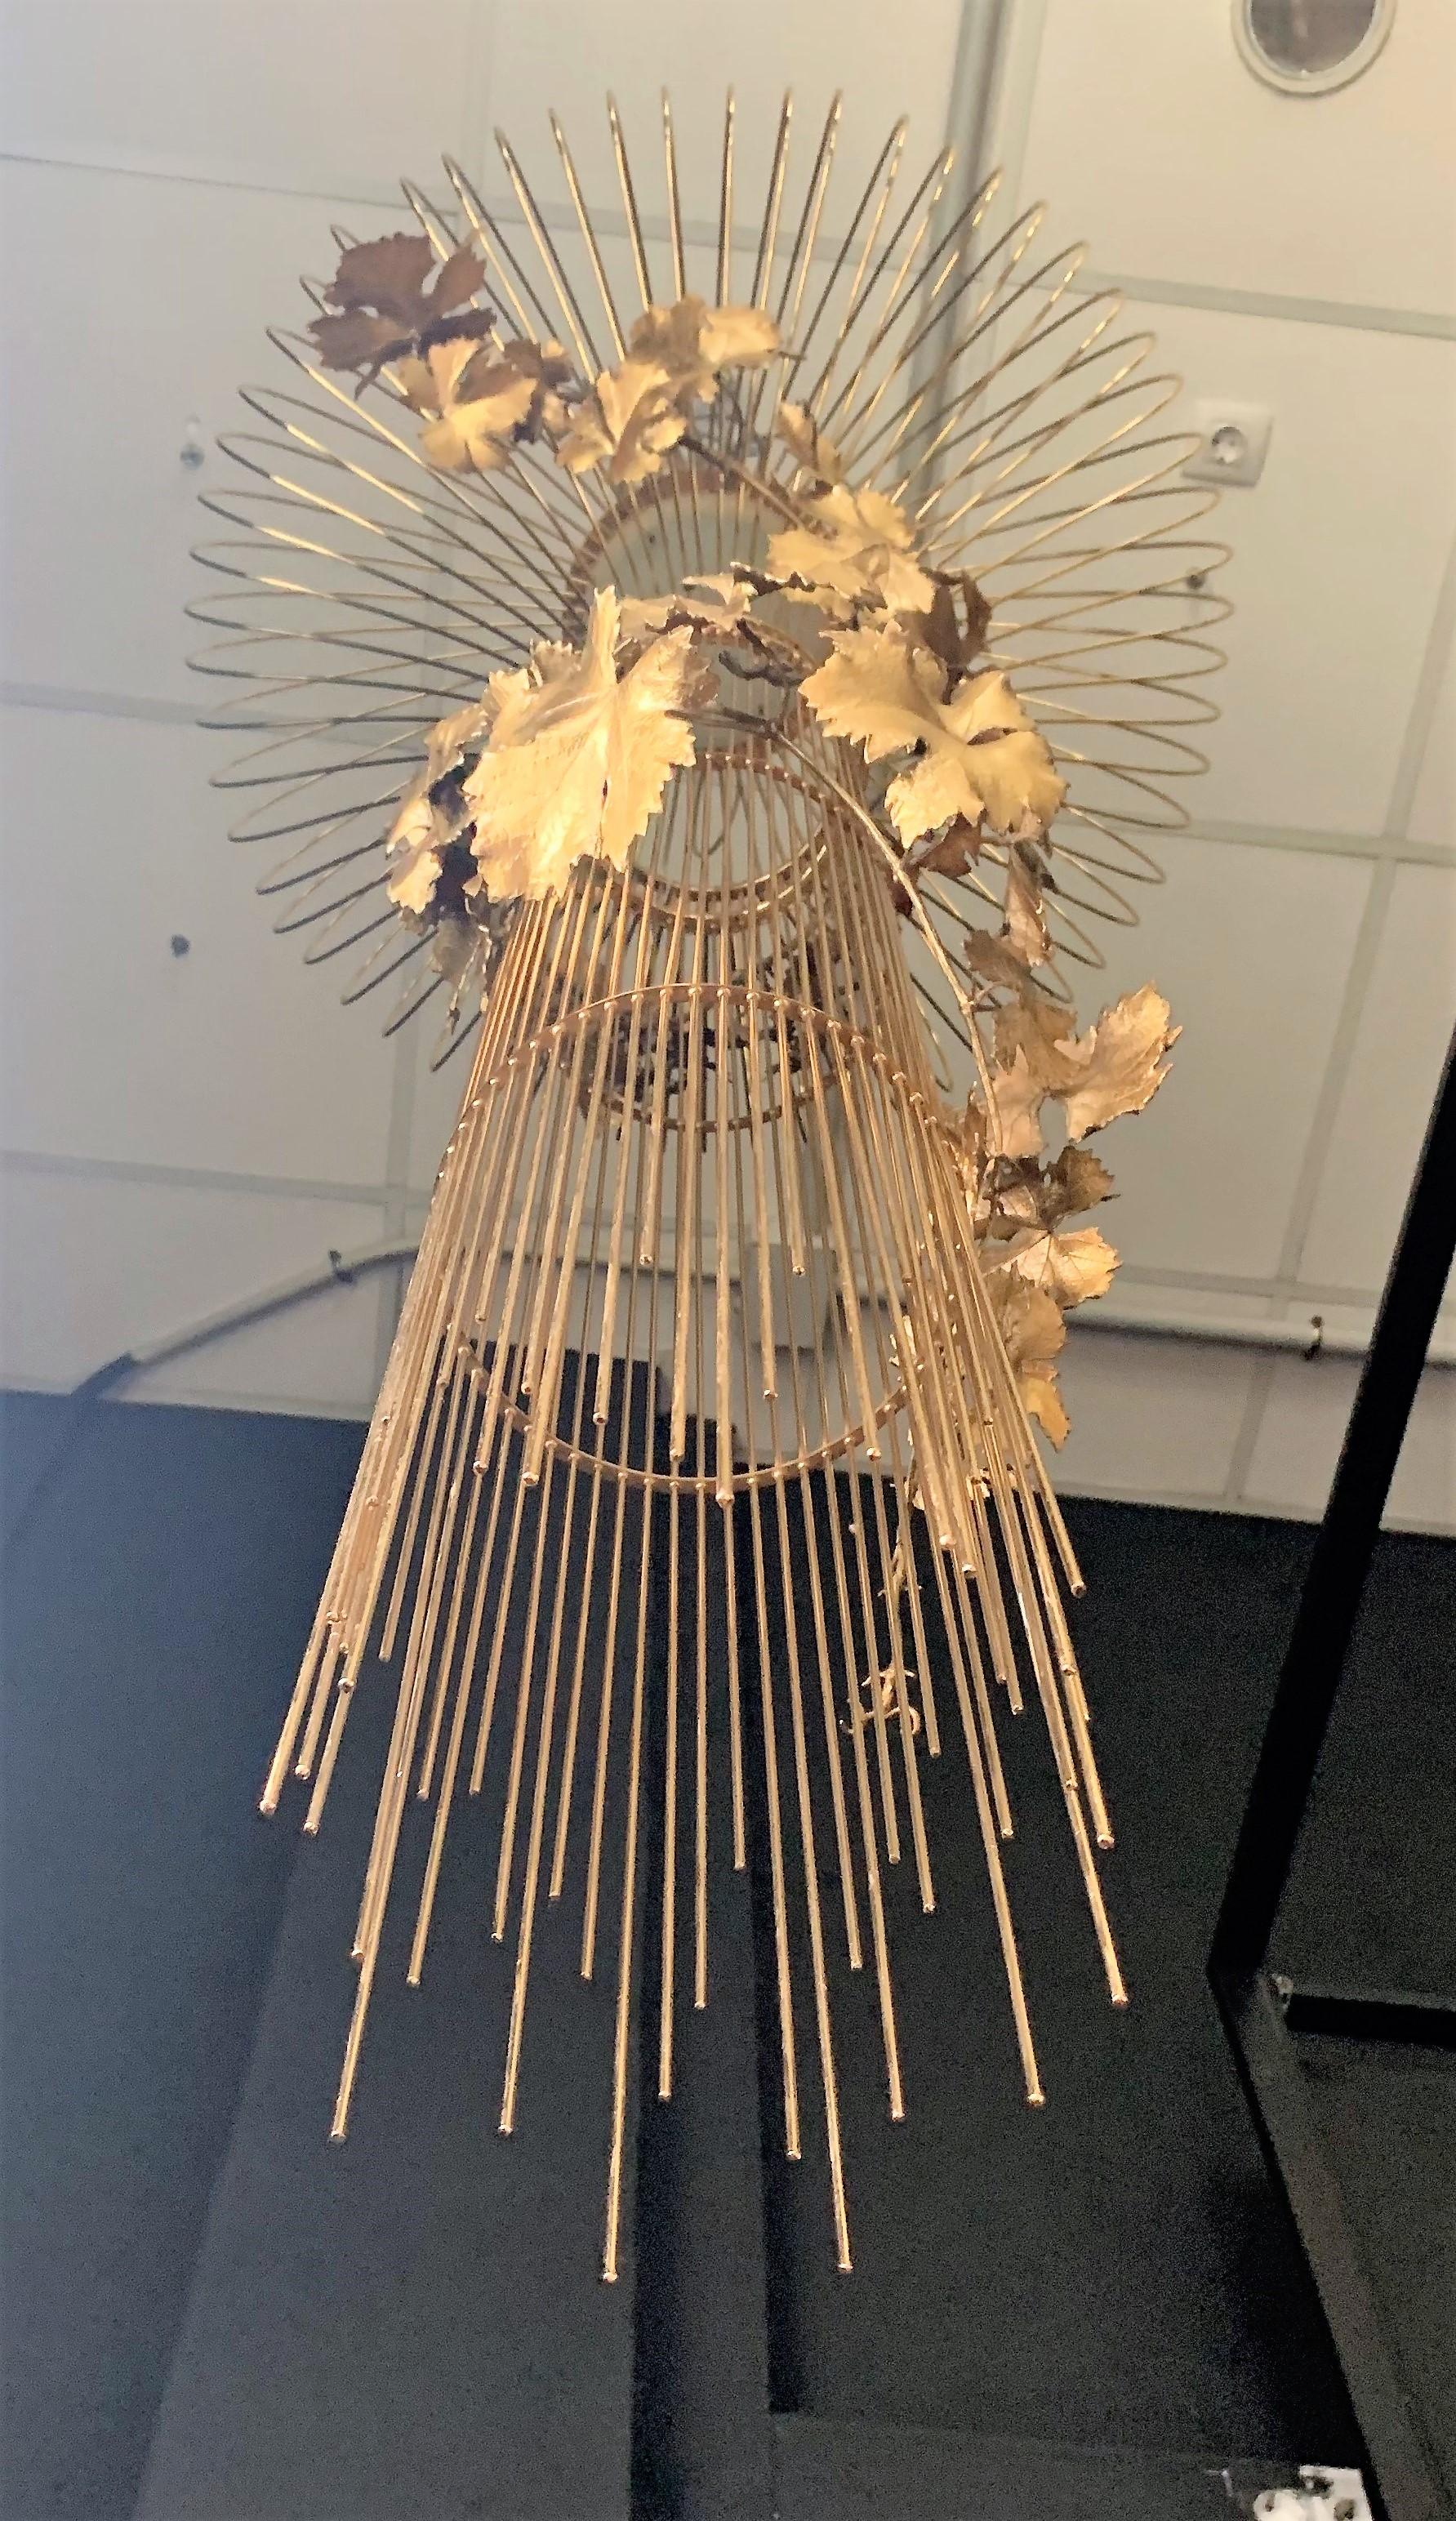 21st Century Sculptural Modern Handmade Led Chandelier in Brass and Lost Wax In Excellent Condition For Sale In Miami, FL